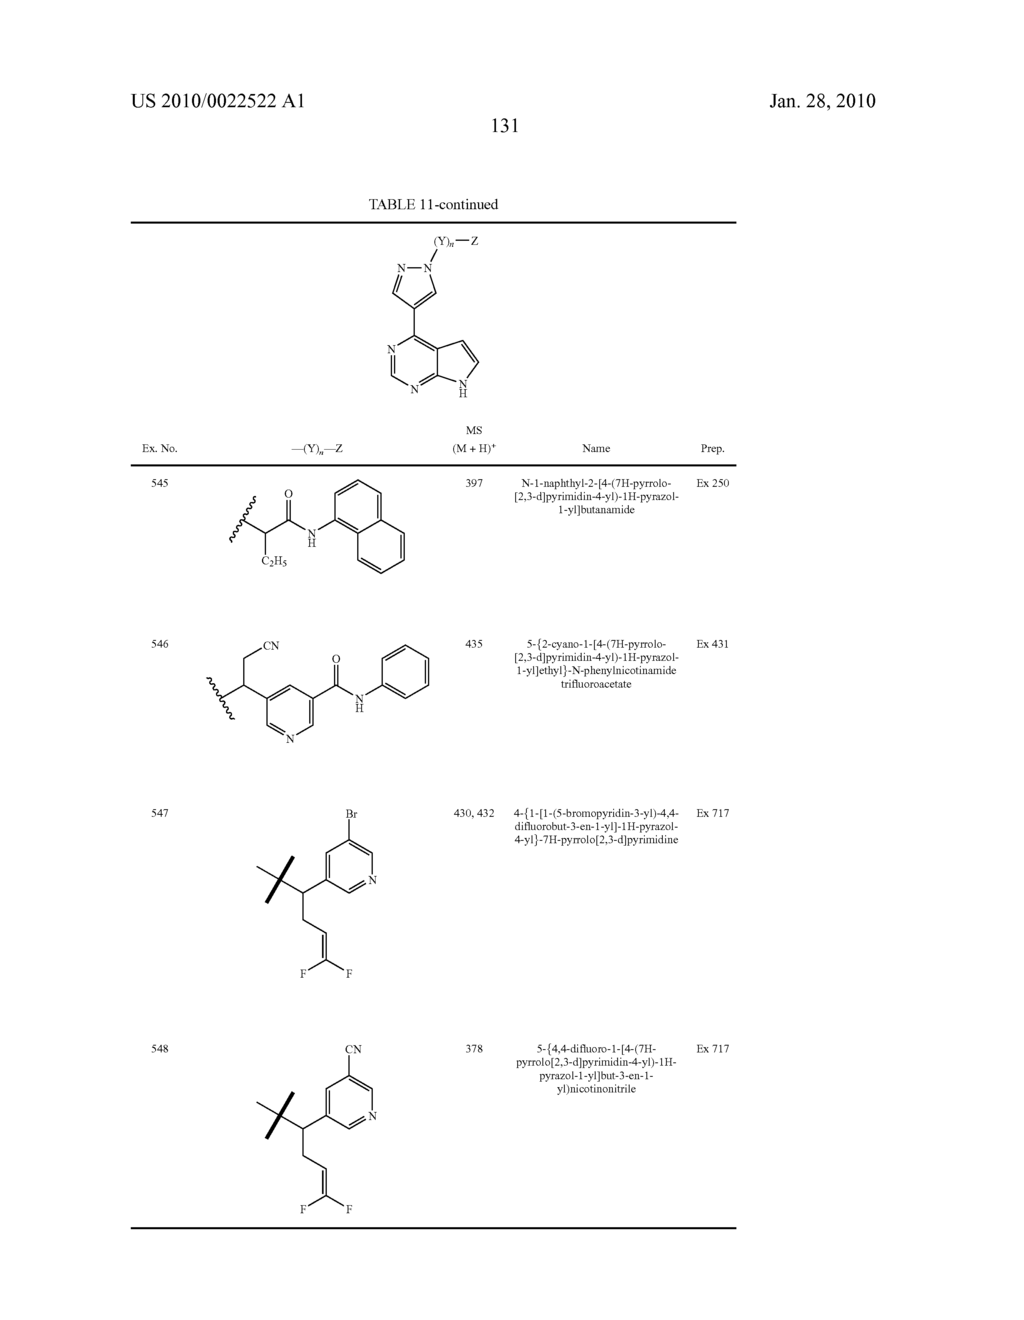 HETEROARYL SUBSTITUTED PYRROLO[2,3-b]PYRIDINES AND PYRROLO[2,3-b]PYRIMIDINES AS JANUS KINASE INHIBITORS - diagram, schematic, and image 132